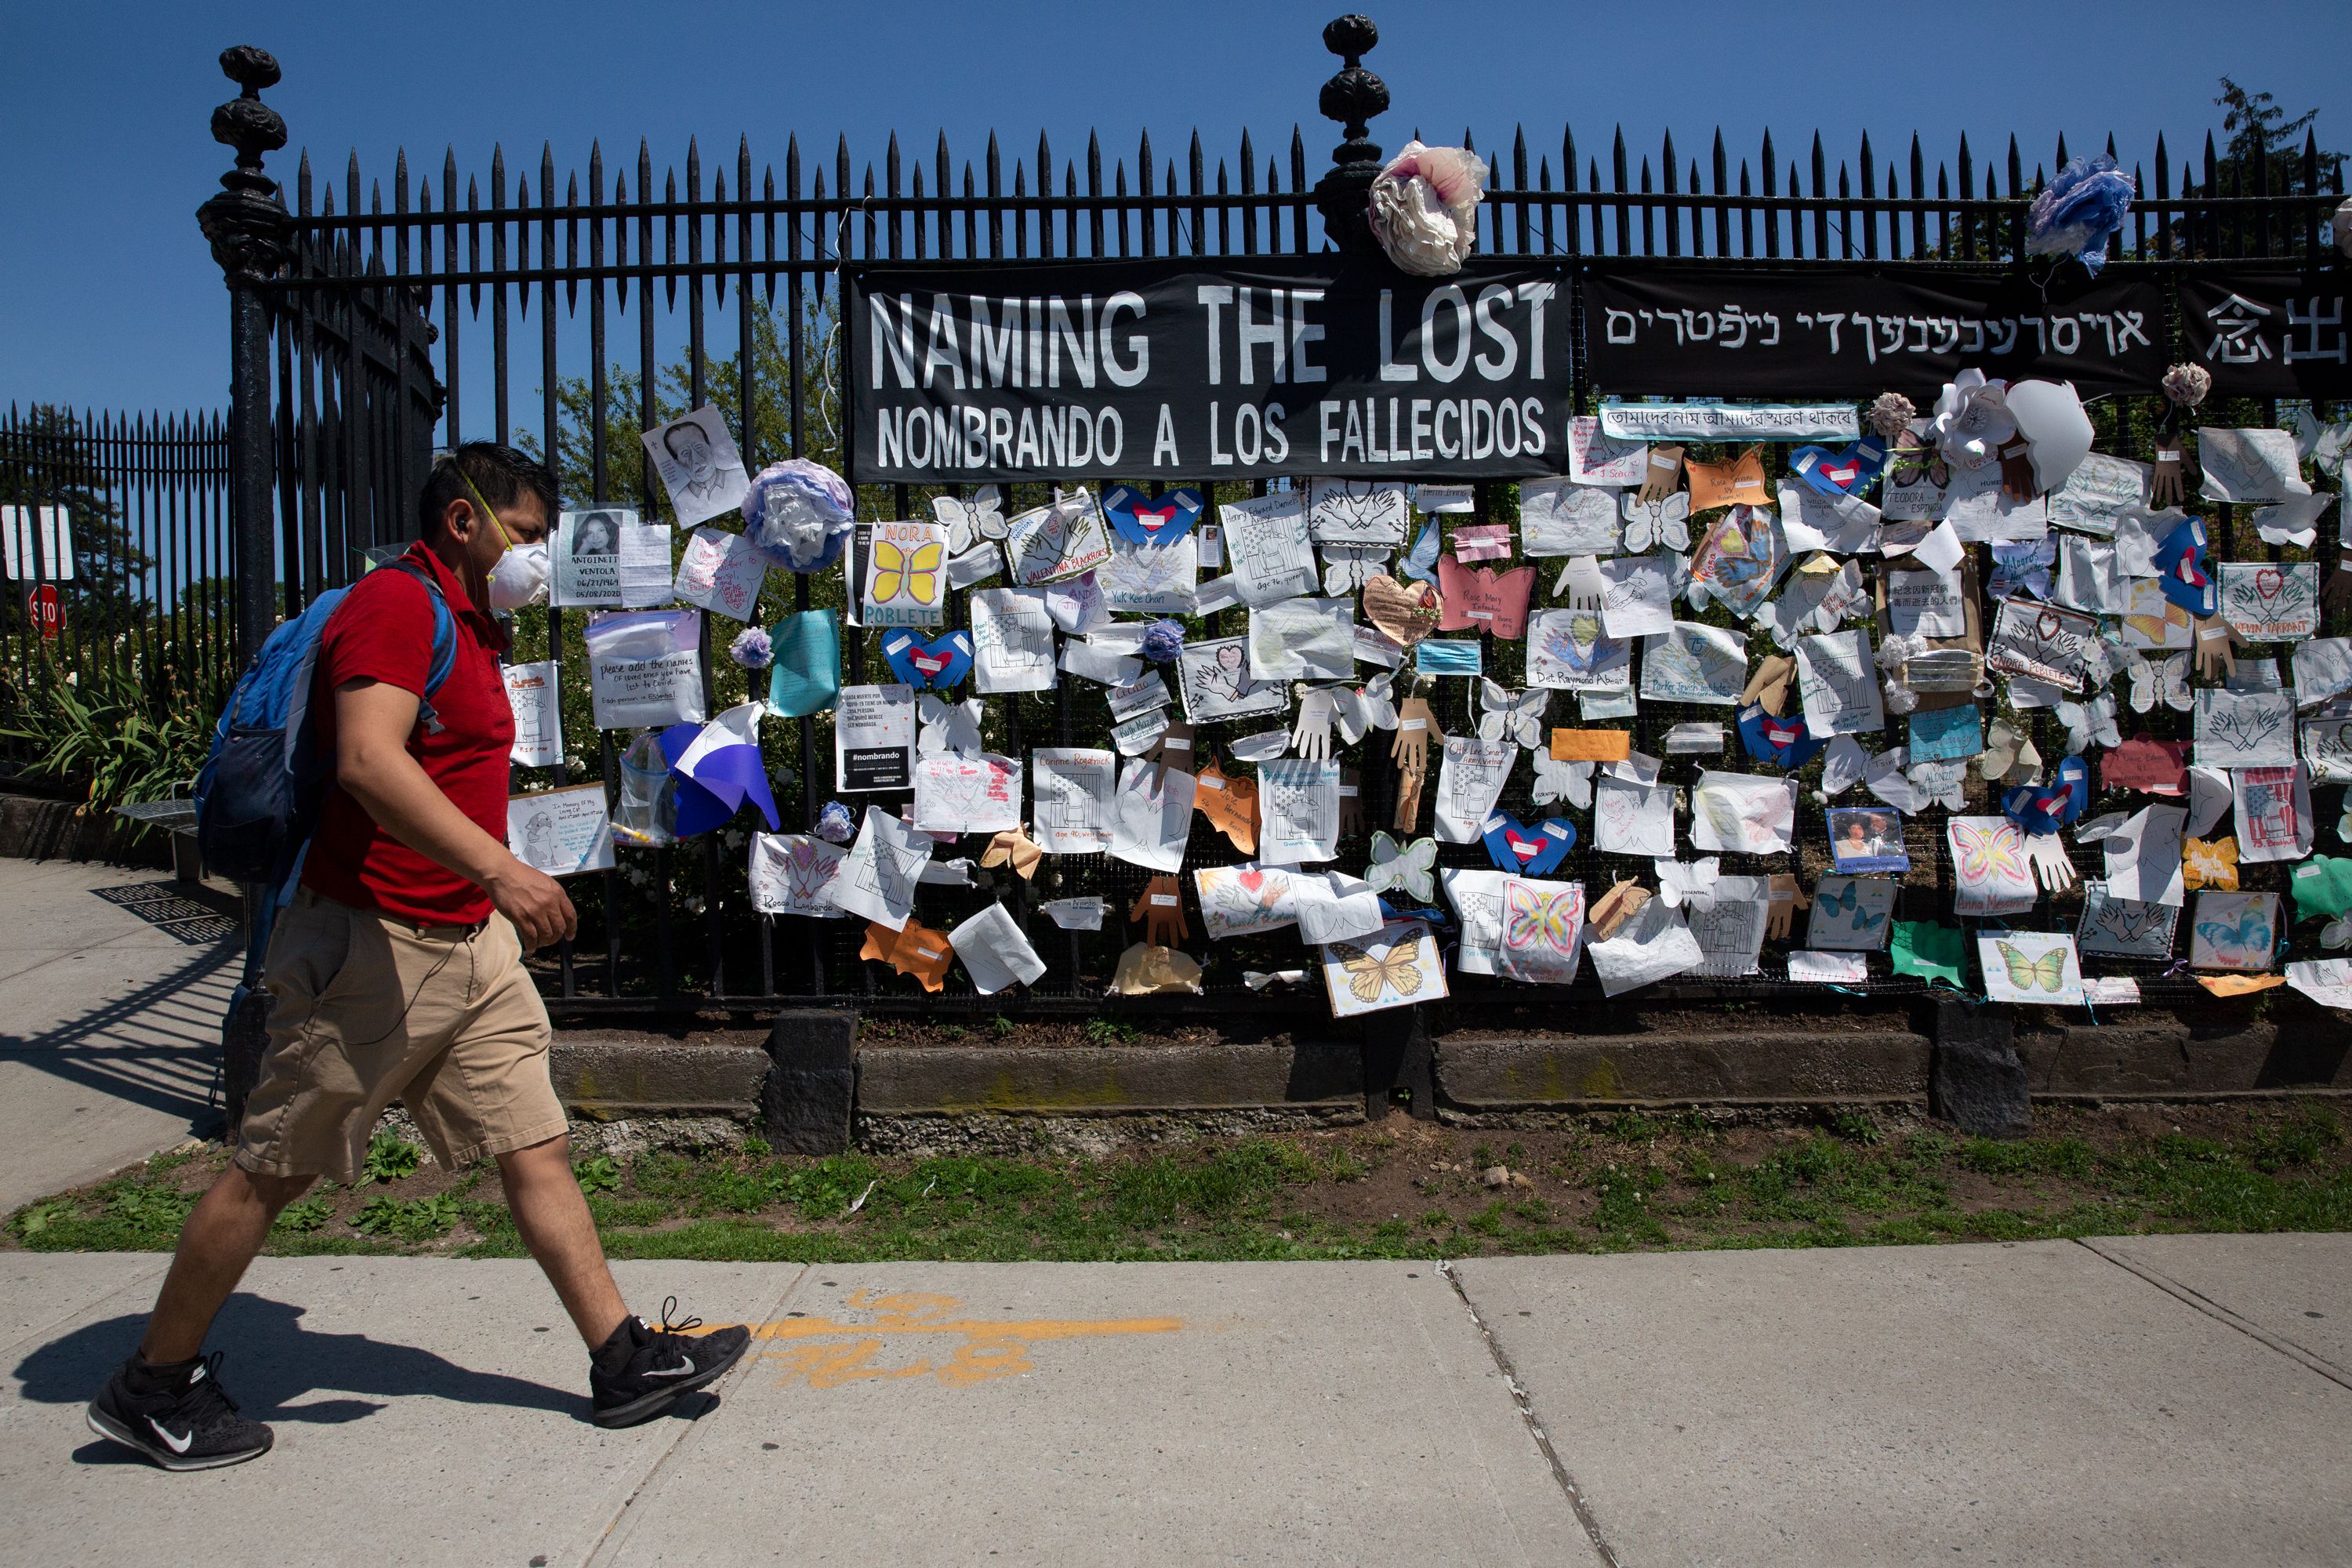 A memorial outside Green-Wood Cemetery in Brooklyn allows community members to add names of loved ones lost to COVID-19, June 9, 2020.